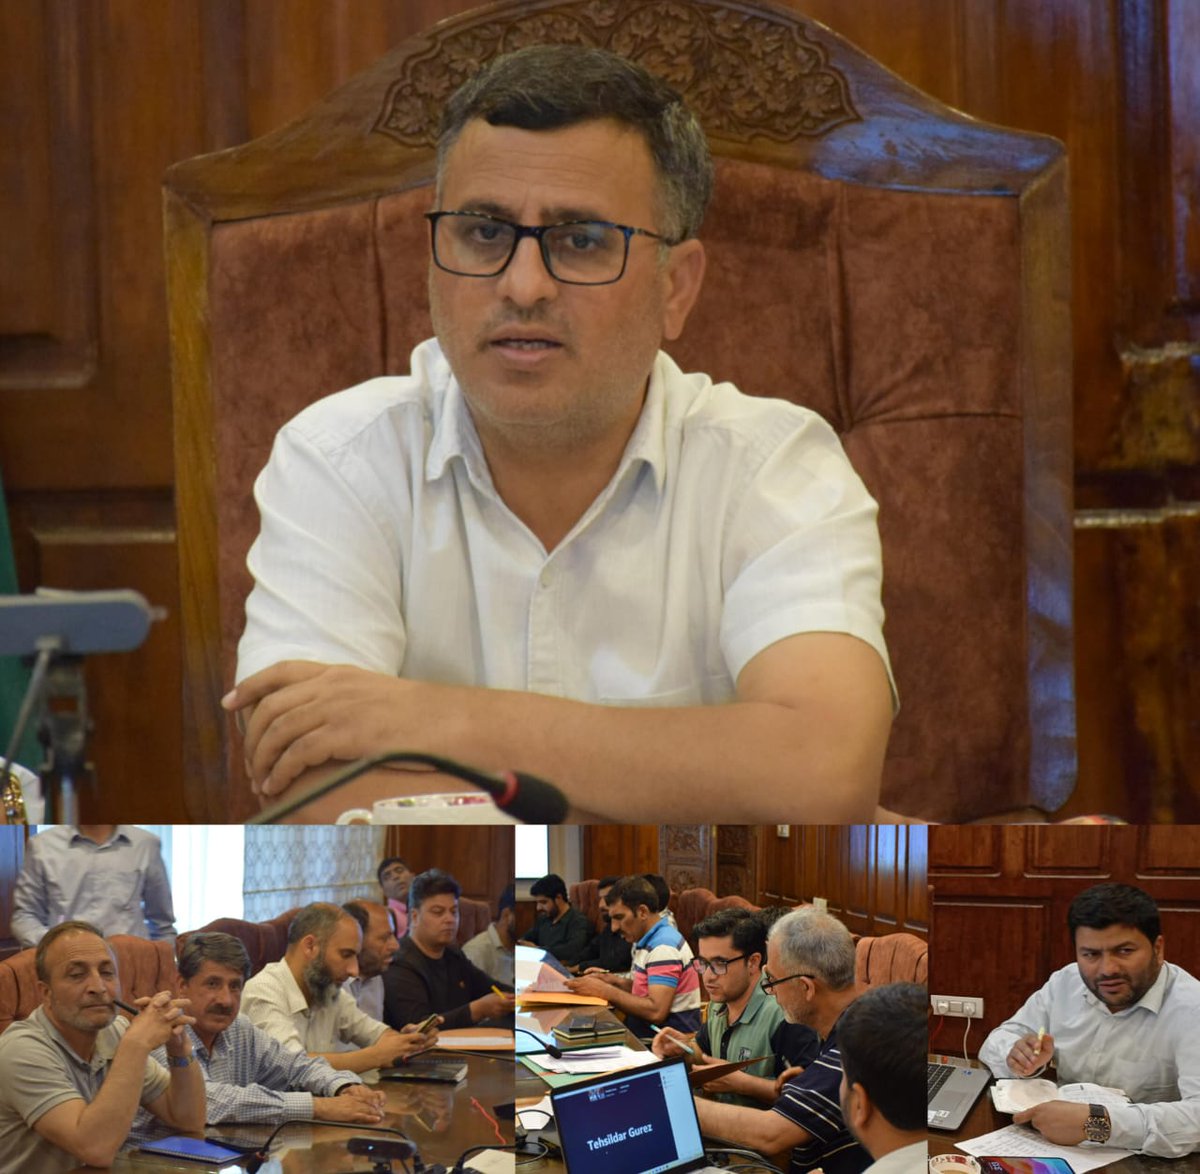 DC Bandipora, Shakeel Ur Rahman chairs meeting of District Level Committee on Change of Land Use (CLU); Approves 04 cases. @diprjk @dcbandipora